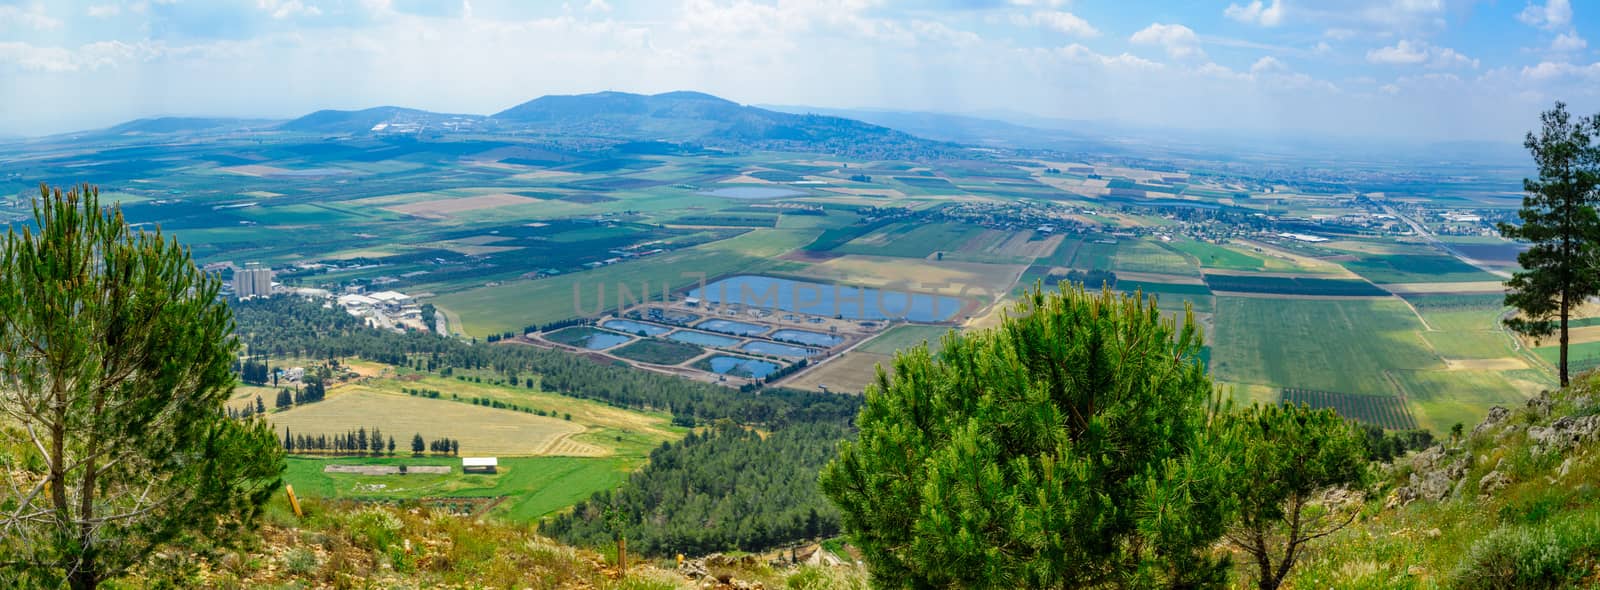 Jezreel Valley landscape, viewed from Mount Precipice by RnDmS